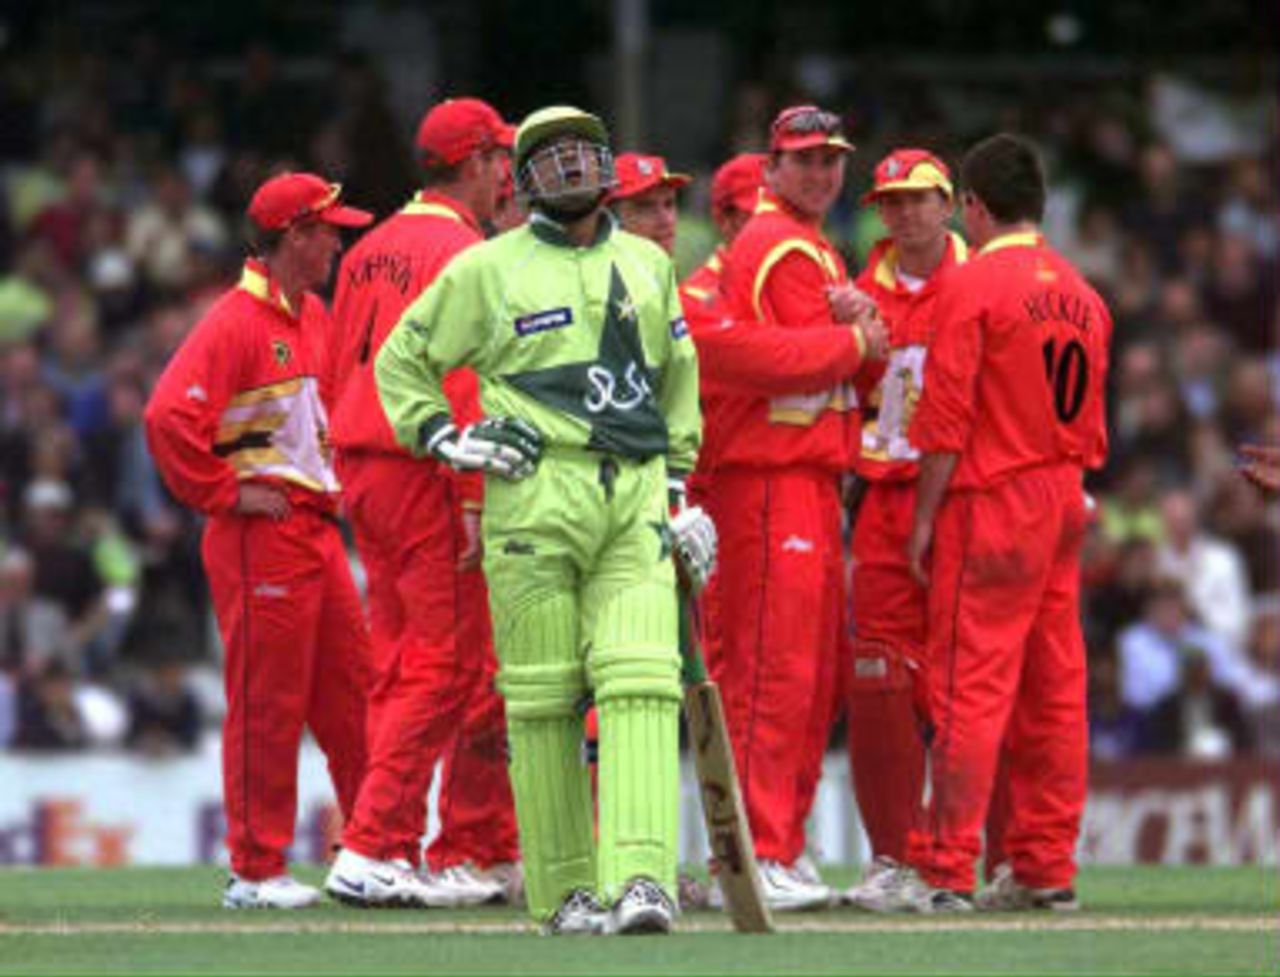 Pakistan batsman Moin Khan walks off as the Zimbabwe team celebrate his runout following the third umpire's decision during their Cricket World Cup Super Six match at The Oval in London 11 June 1999